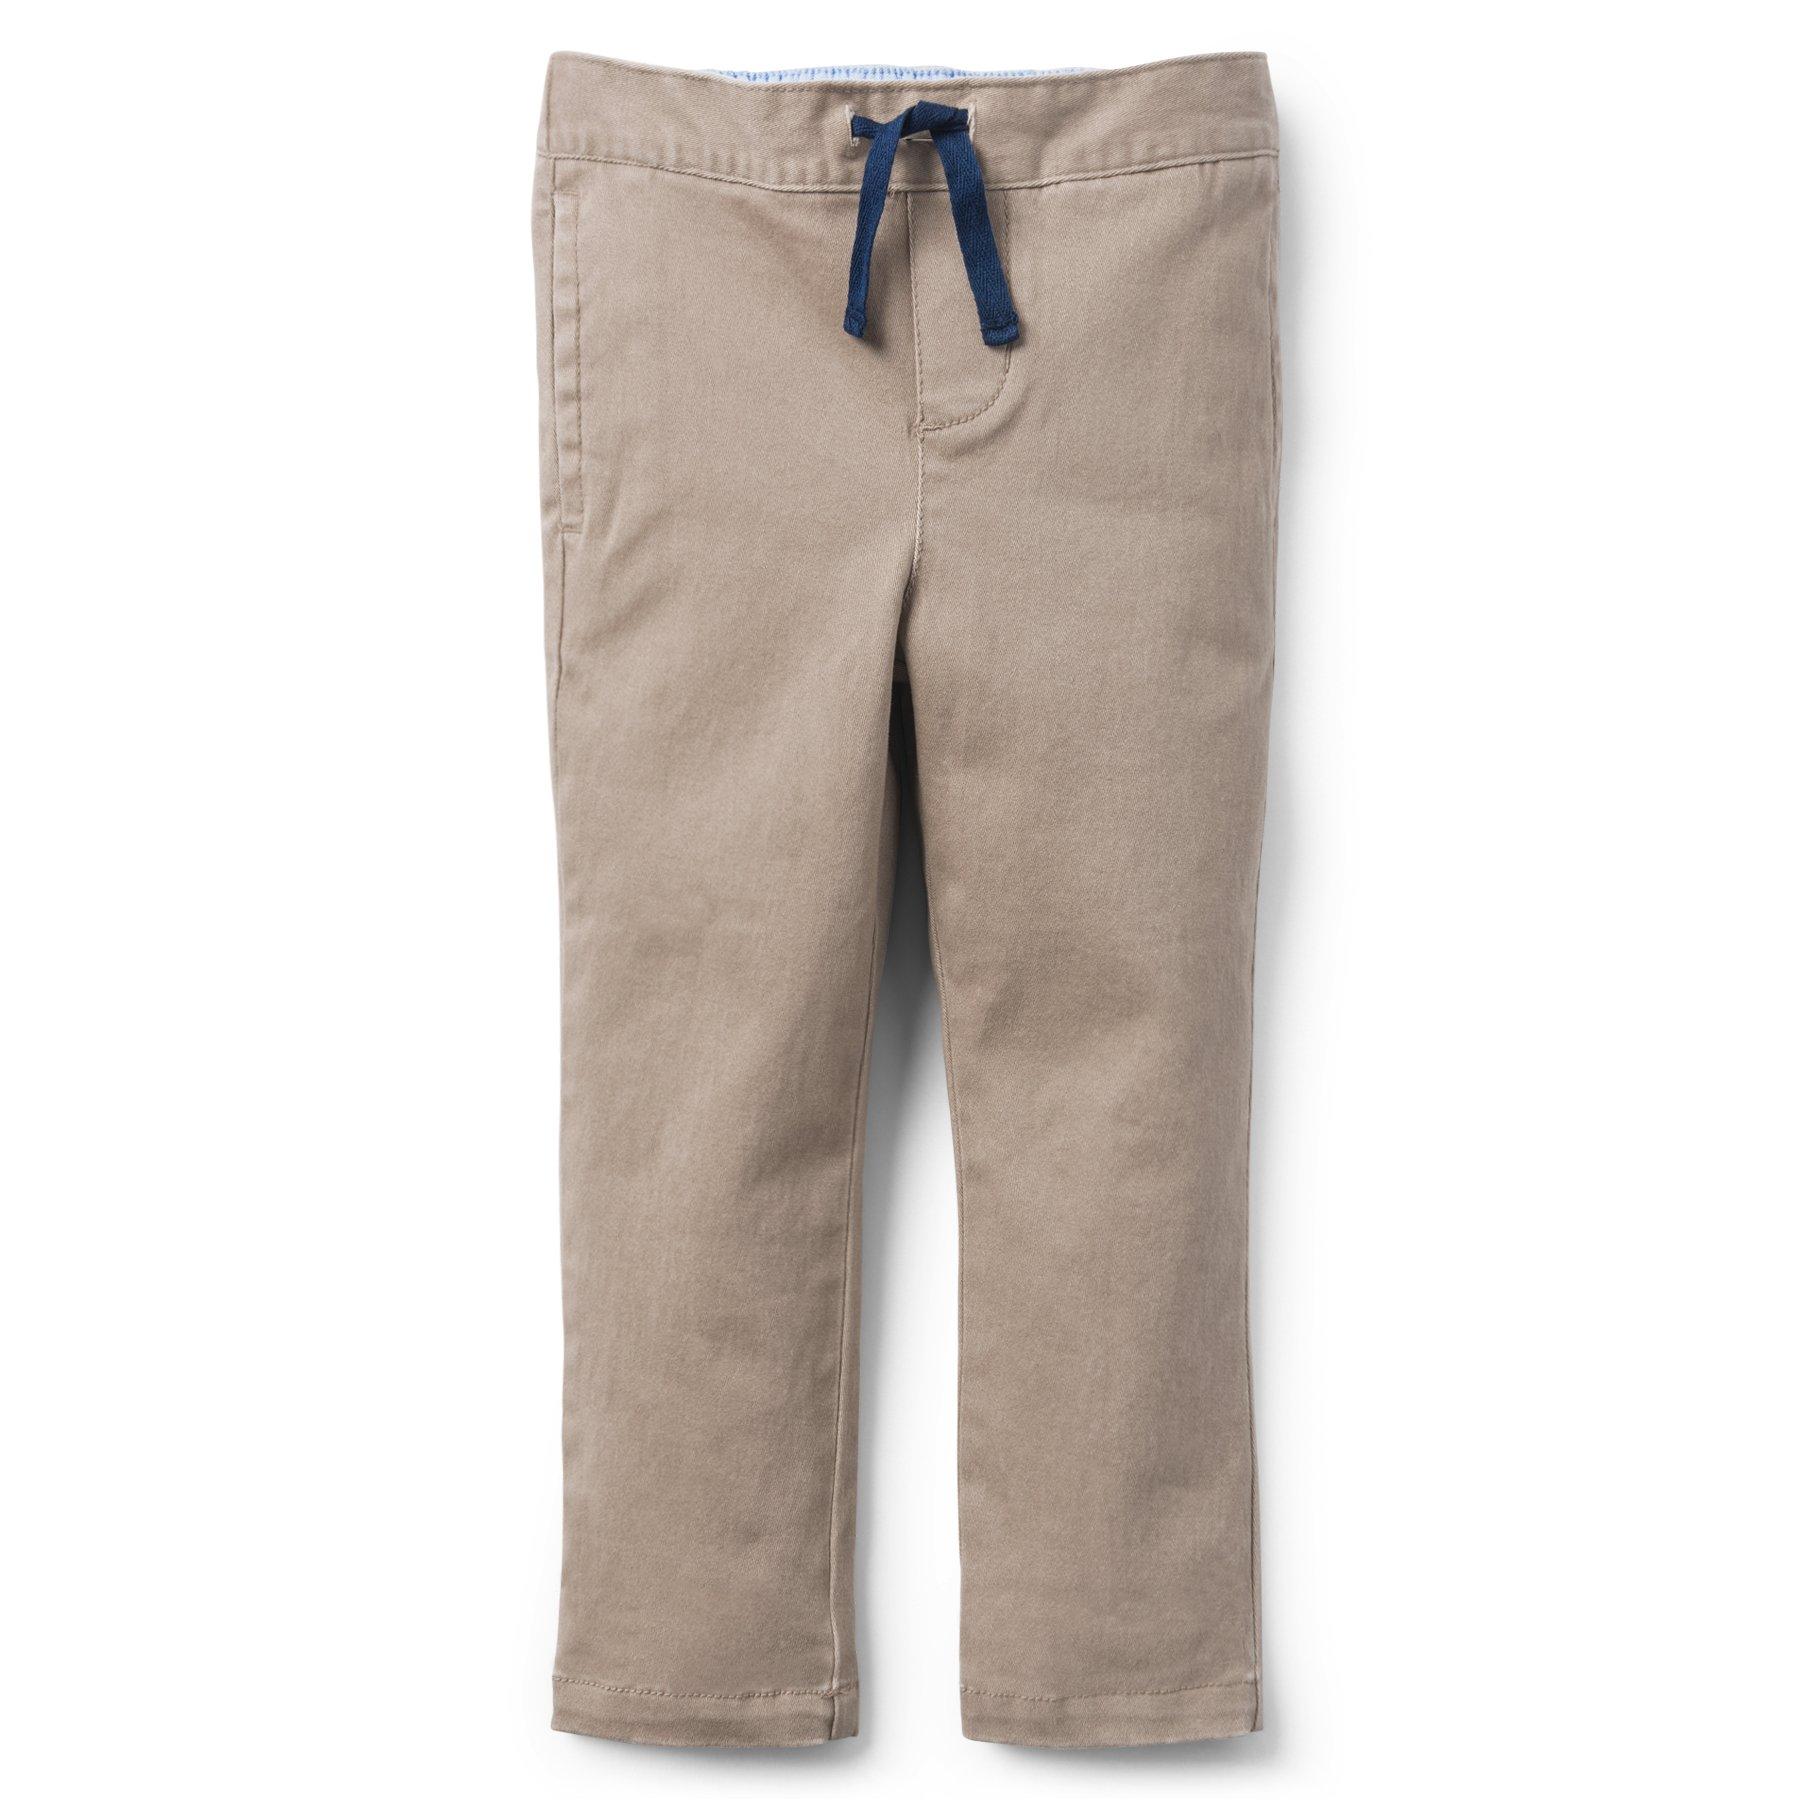 Pull-On Stretch Twill Pant